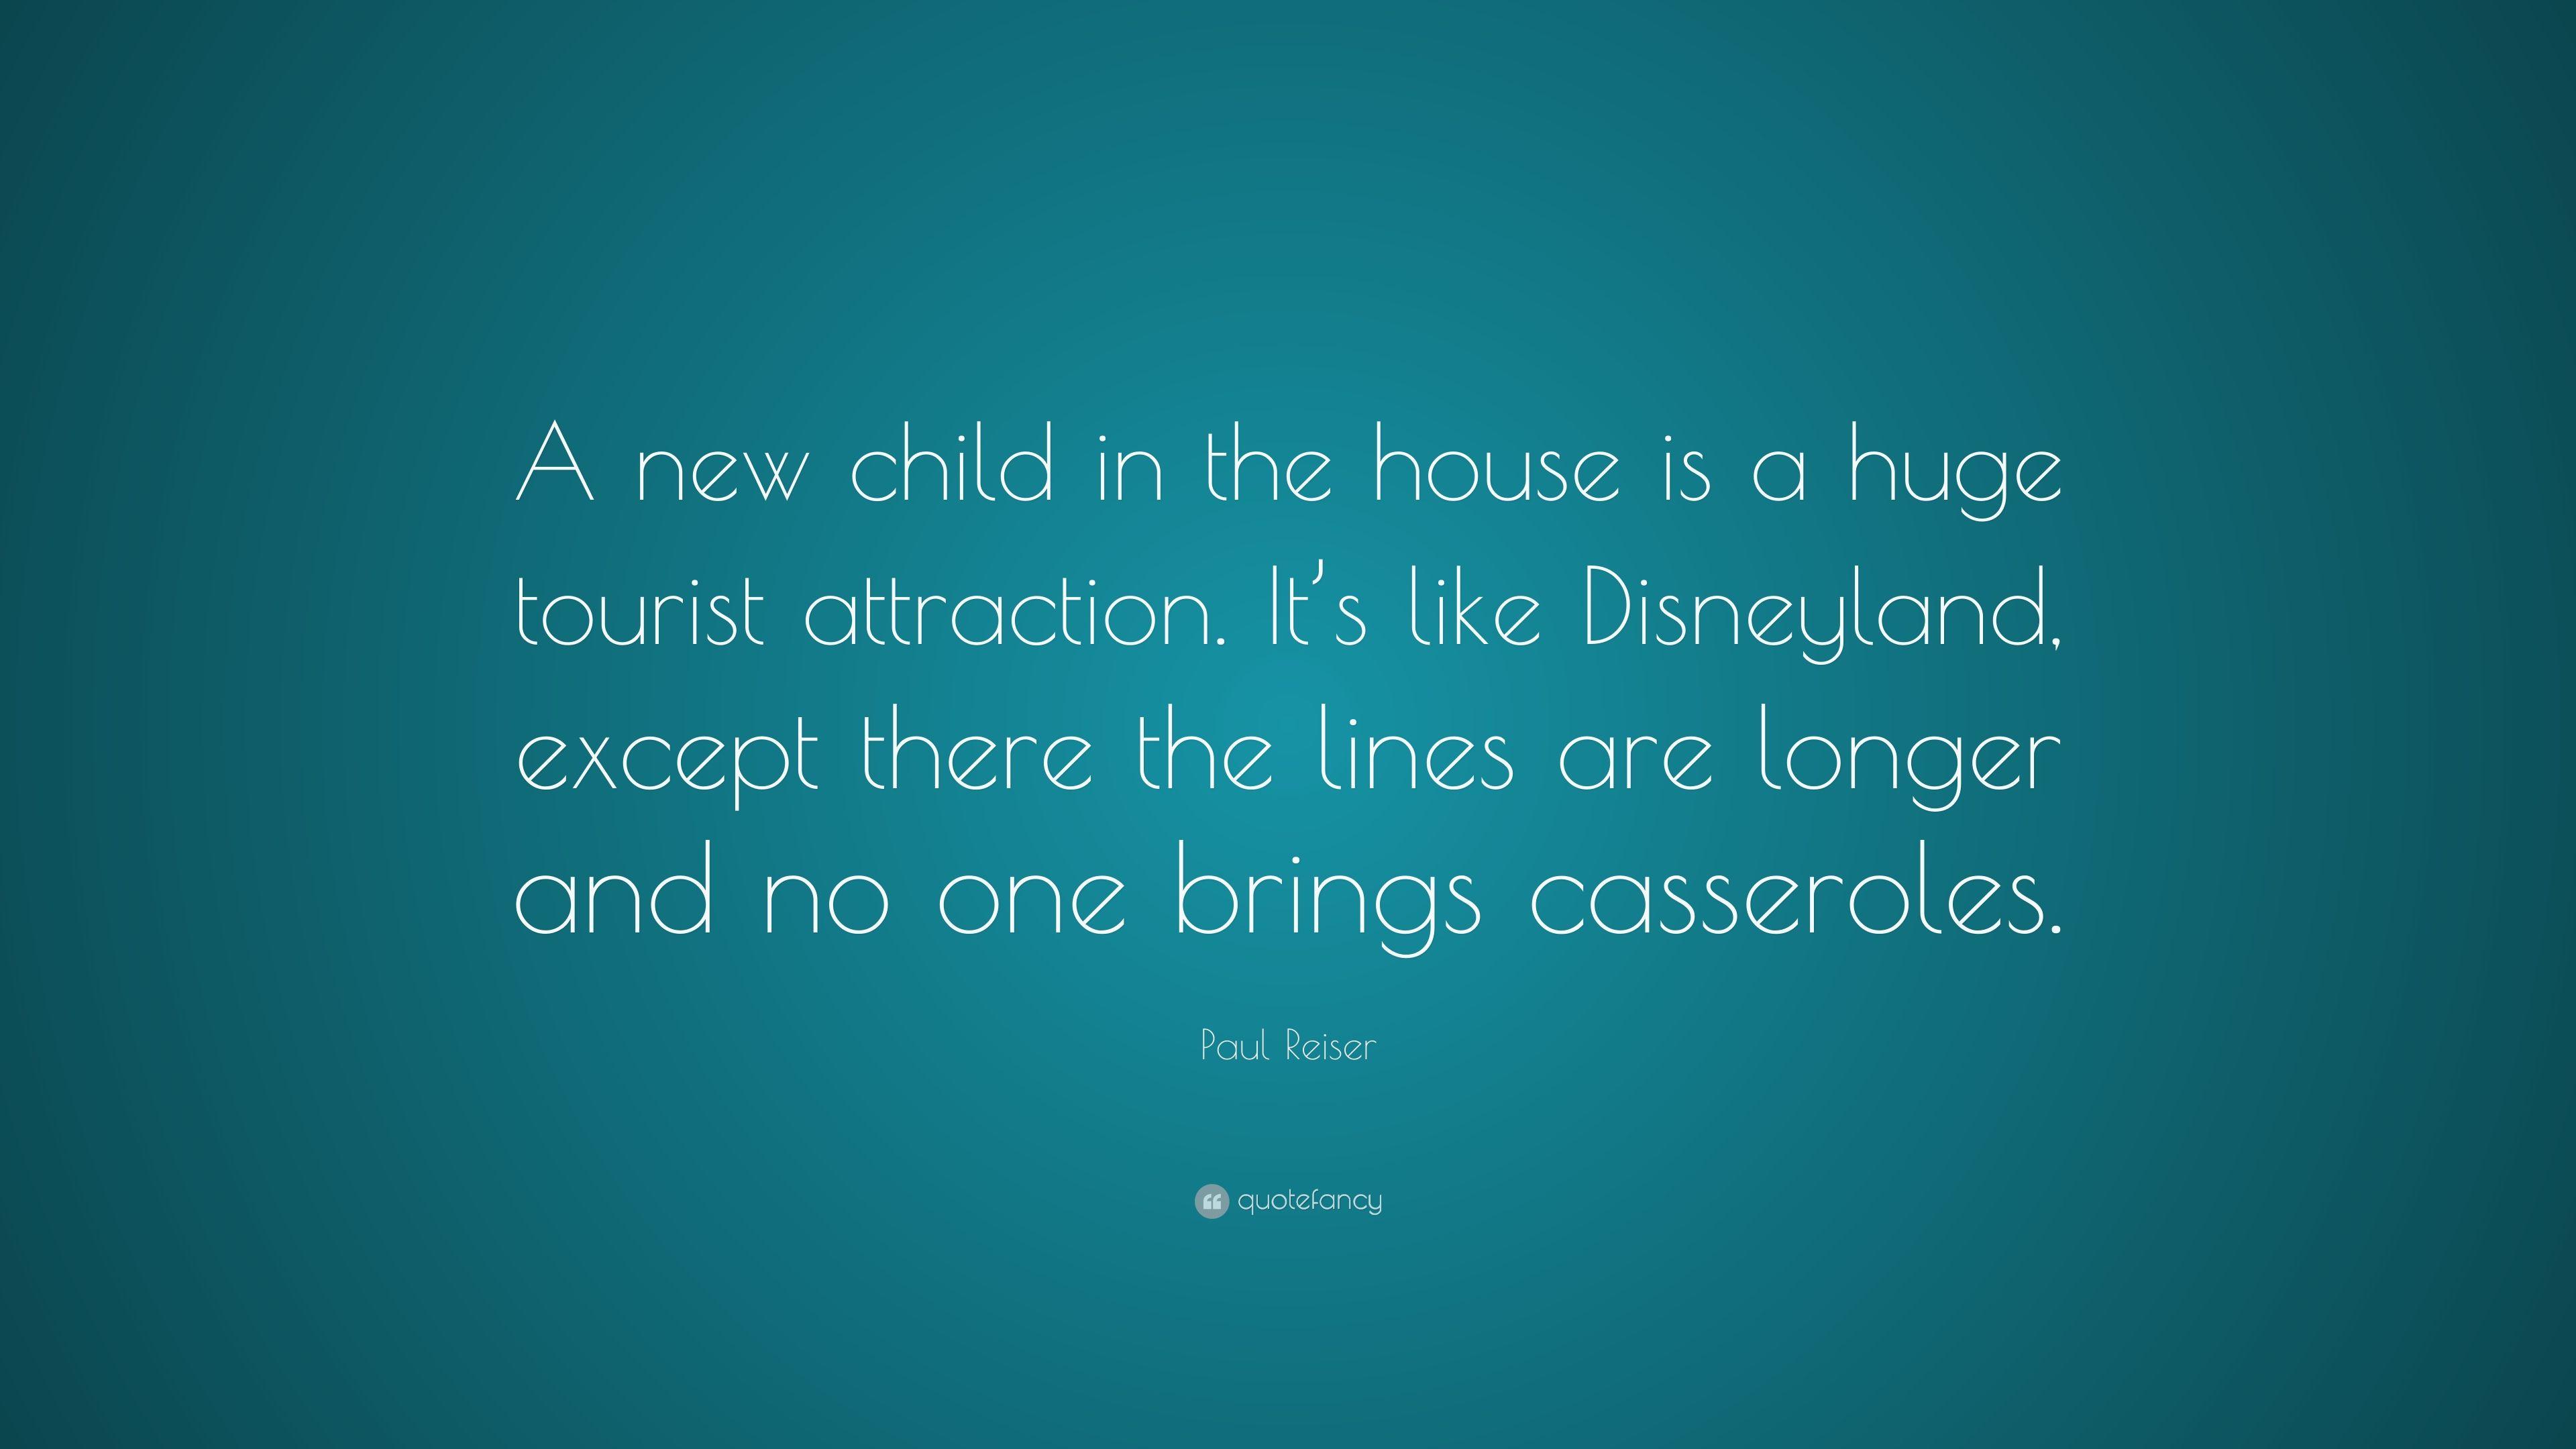 Paul Reiser Quote: “A new child in the house is a huge tourist